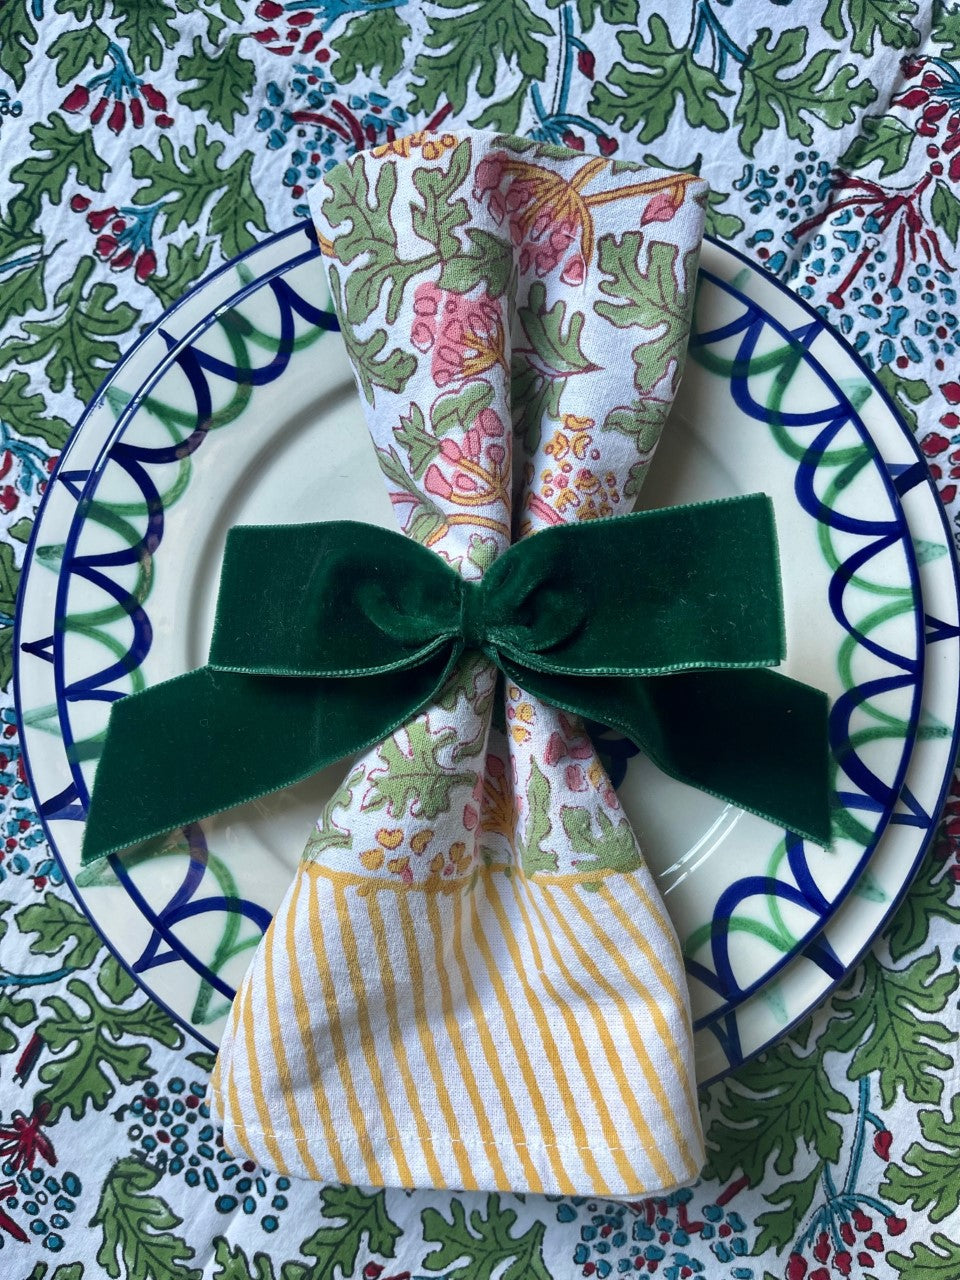 NAPKINS AND BOWS - block printed large cotton napkins and velvet bows ...